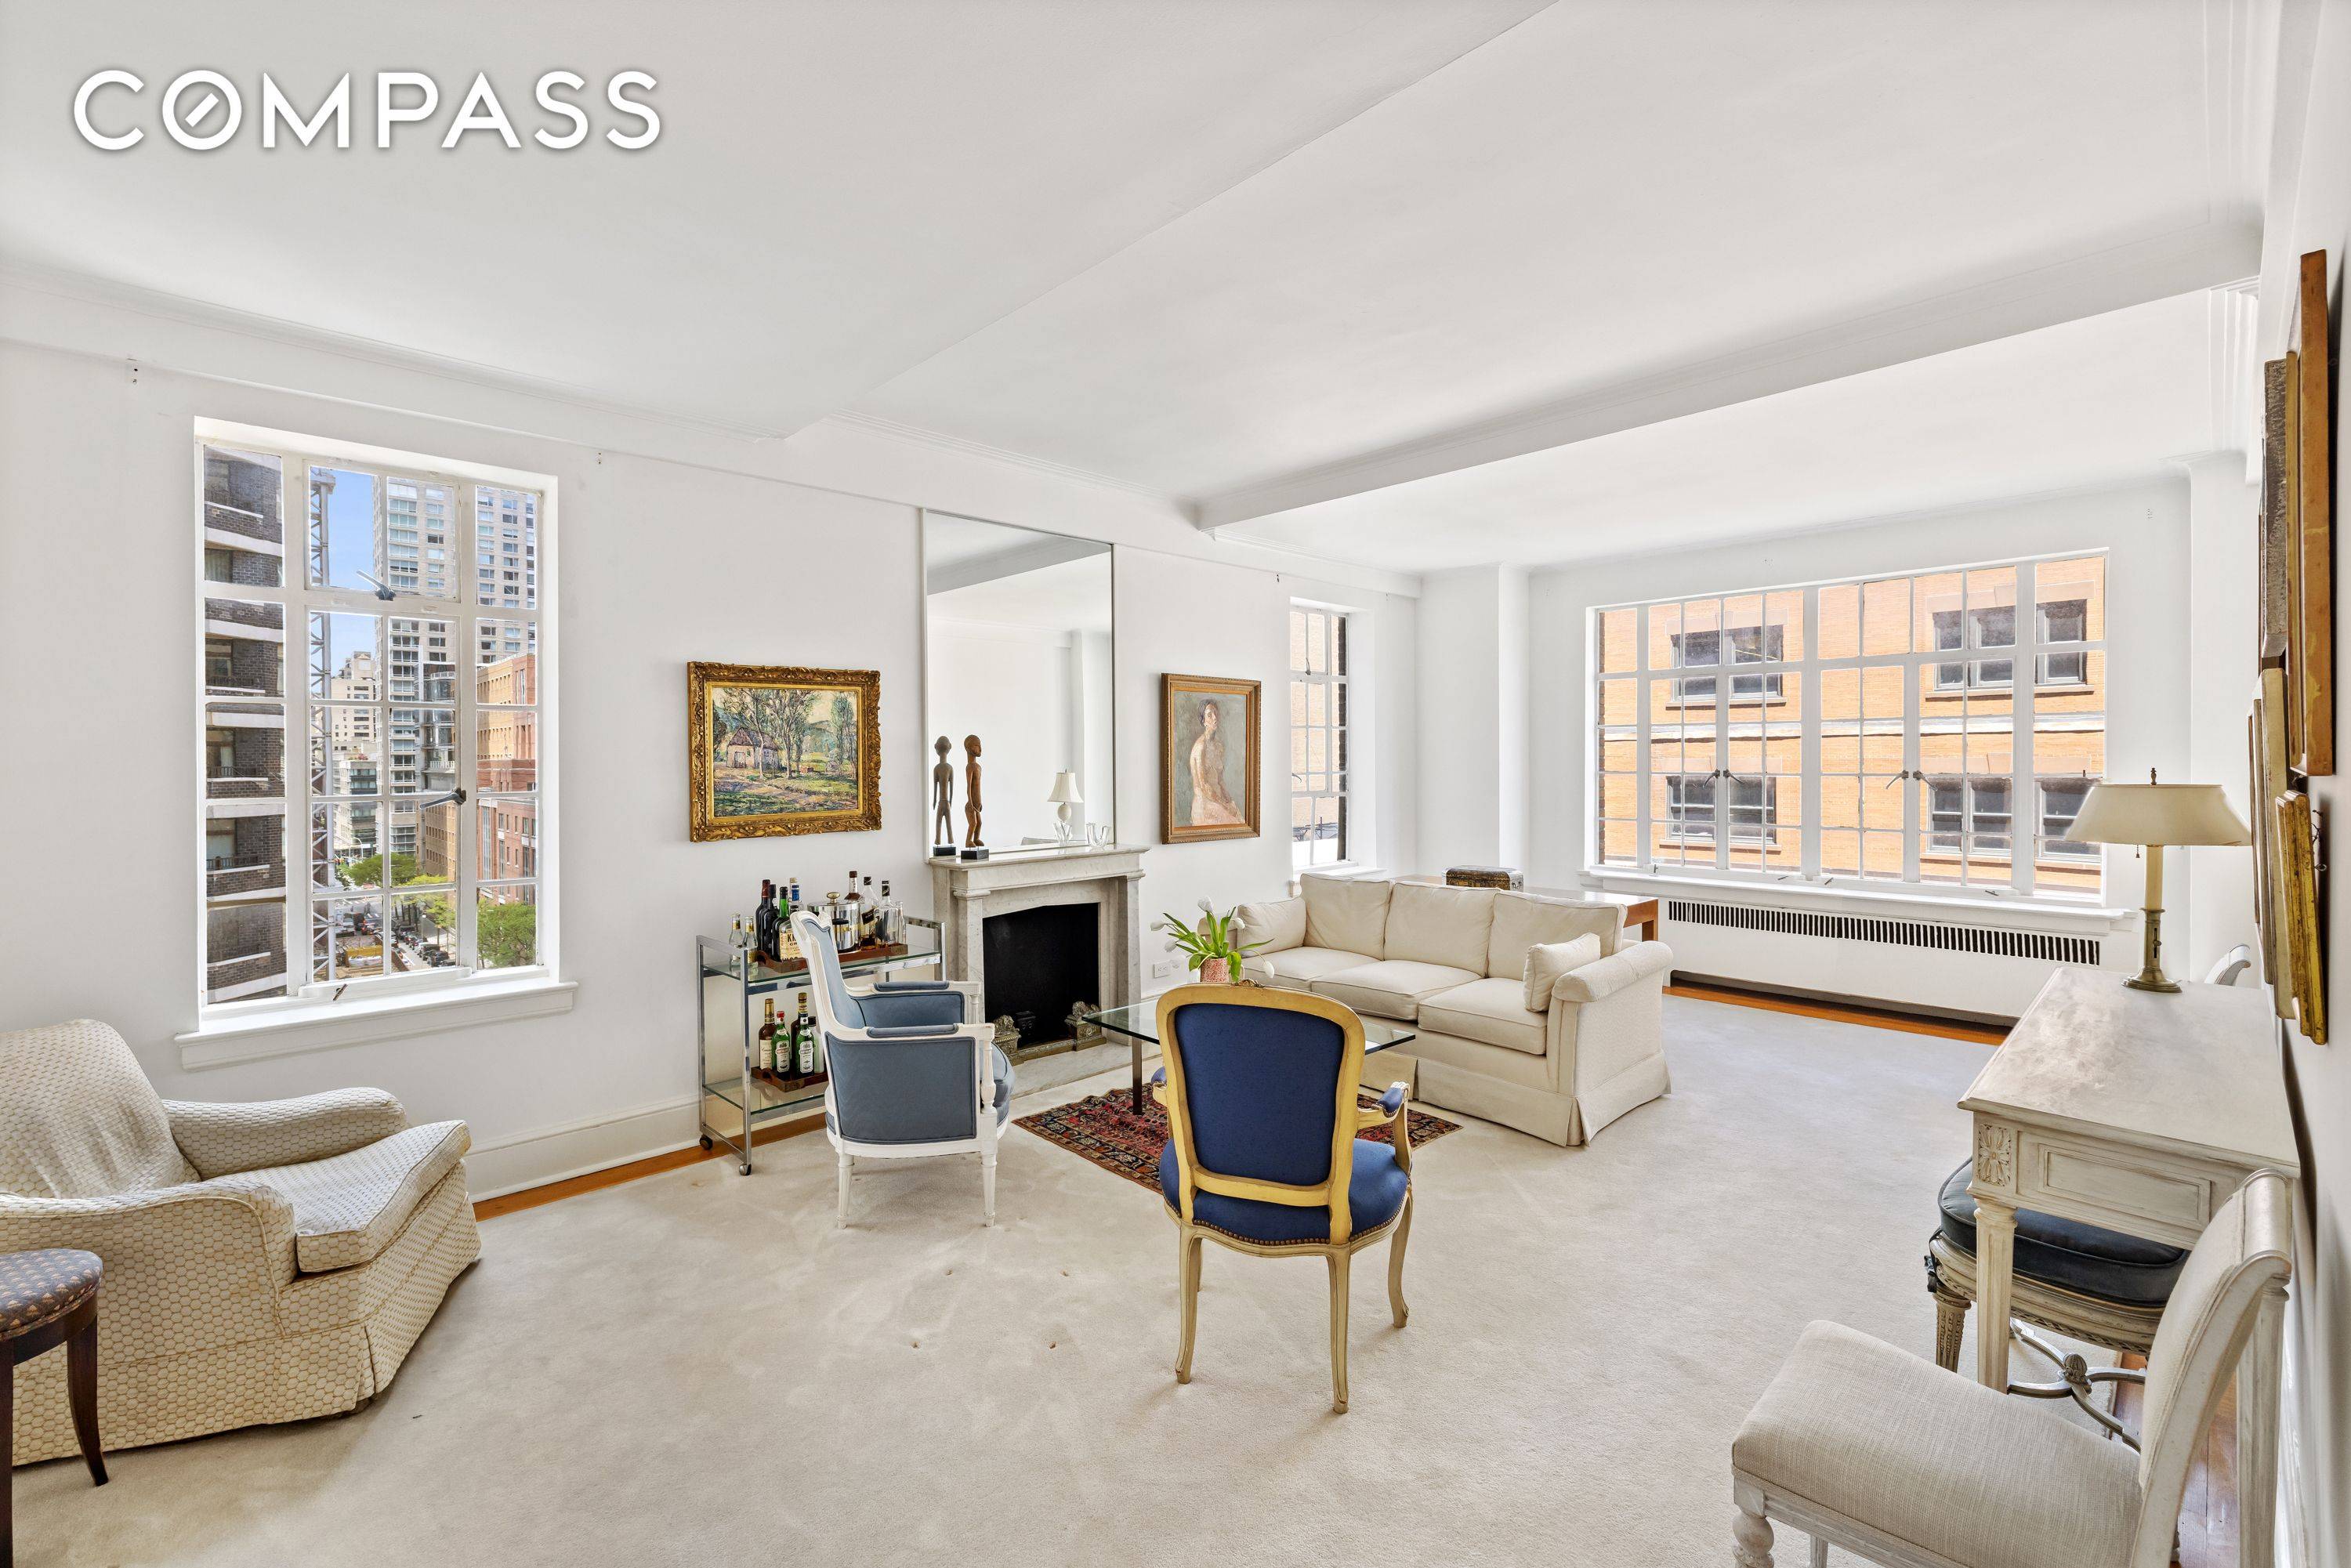 9A is a sun filled and spacious 2BR home on the park with elegant pre war details throughout at the iconic 55 Central Park West, an exquisite Art Deco building ...